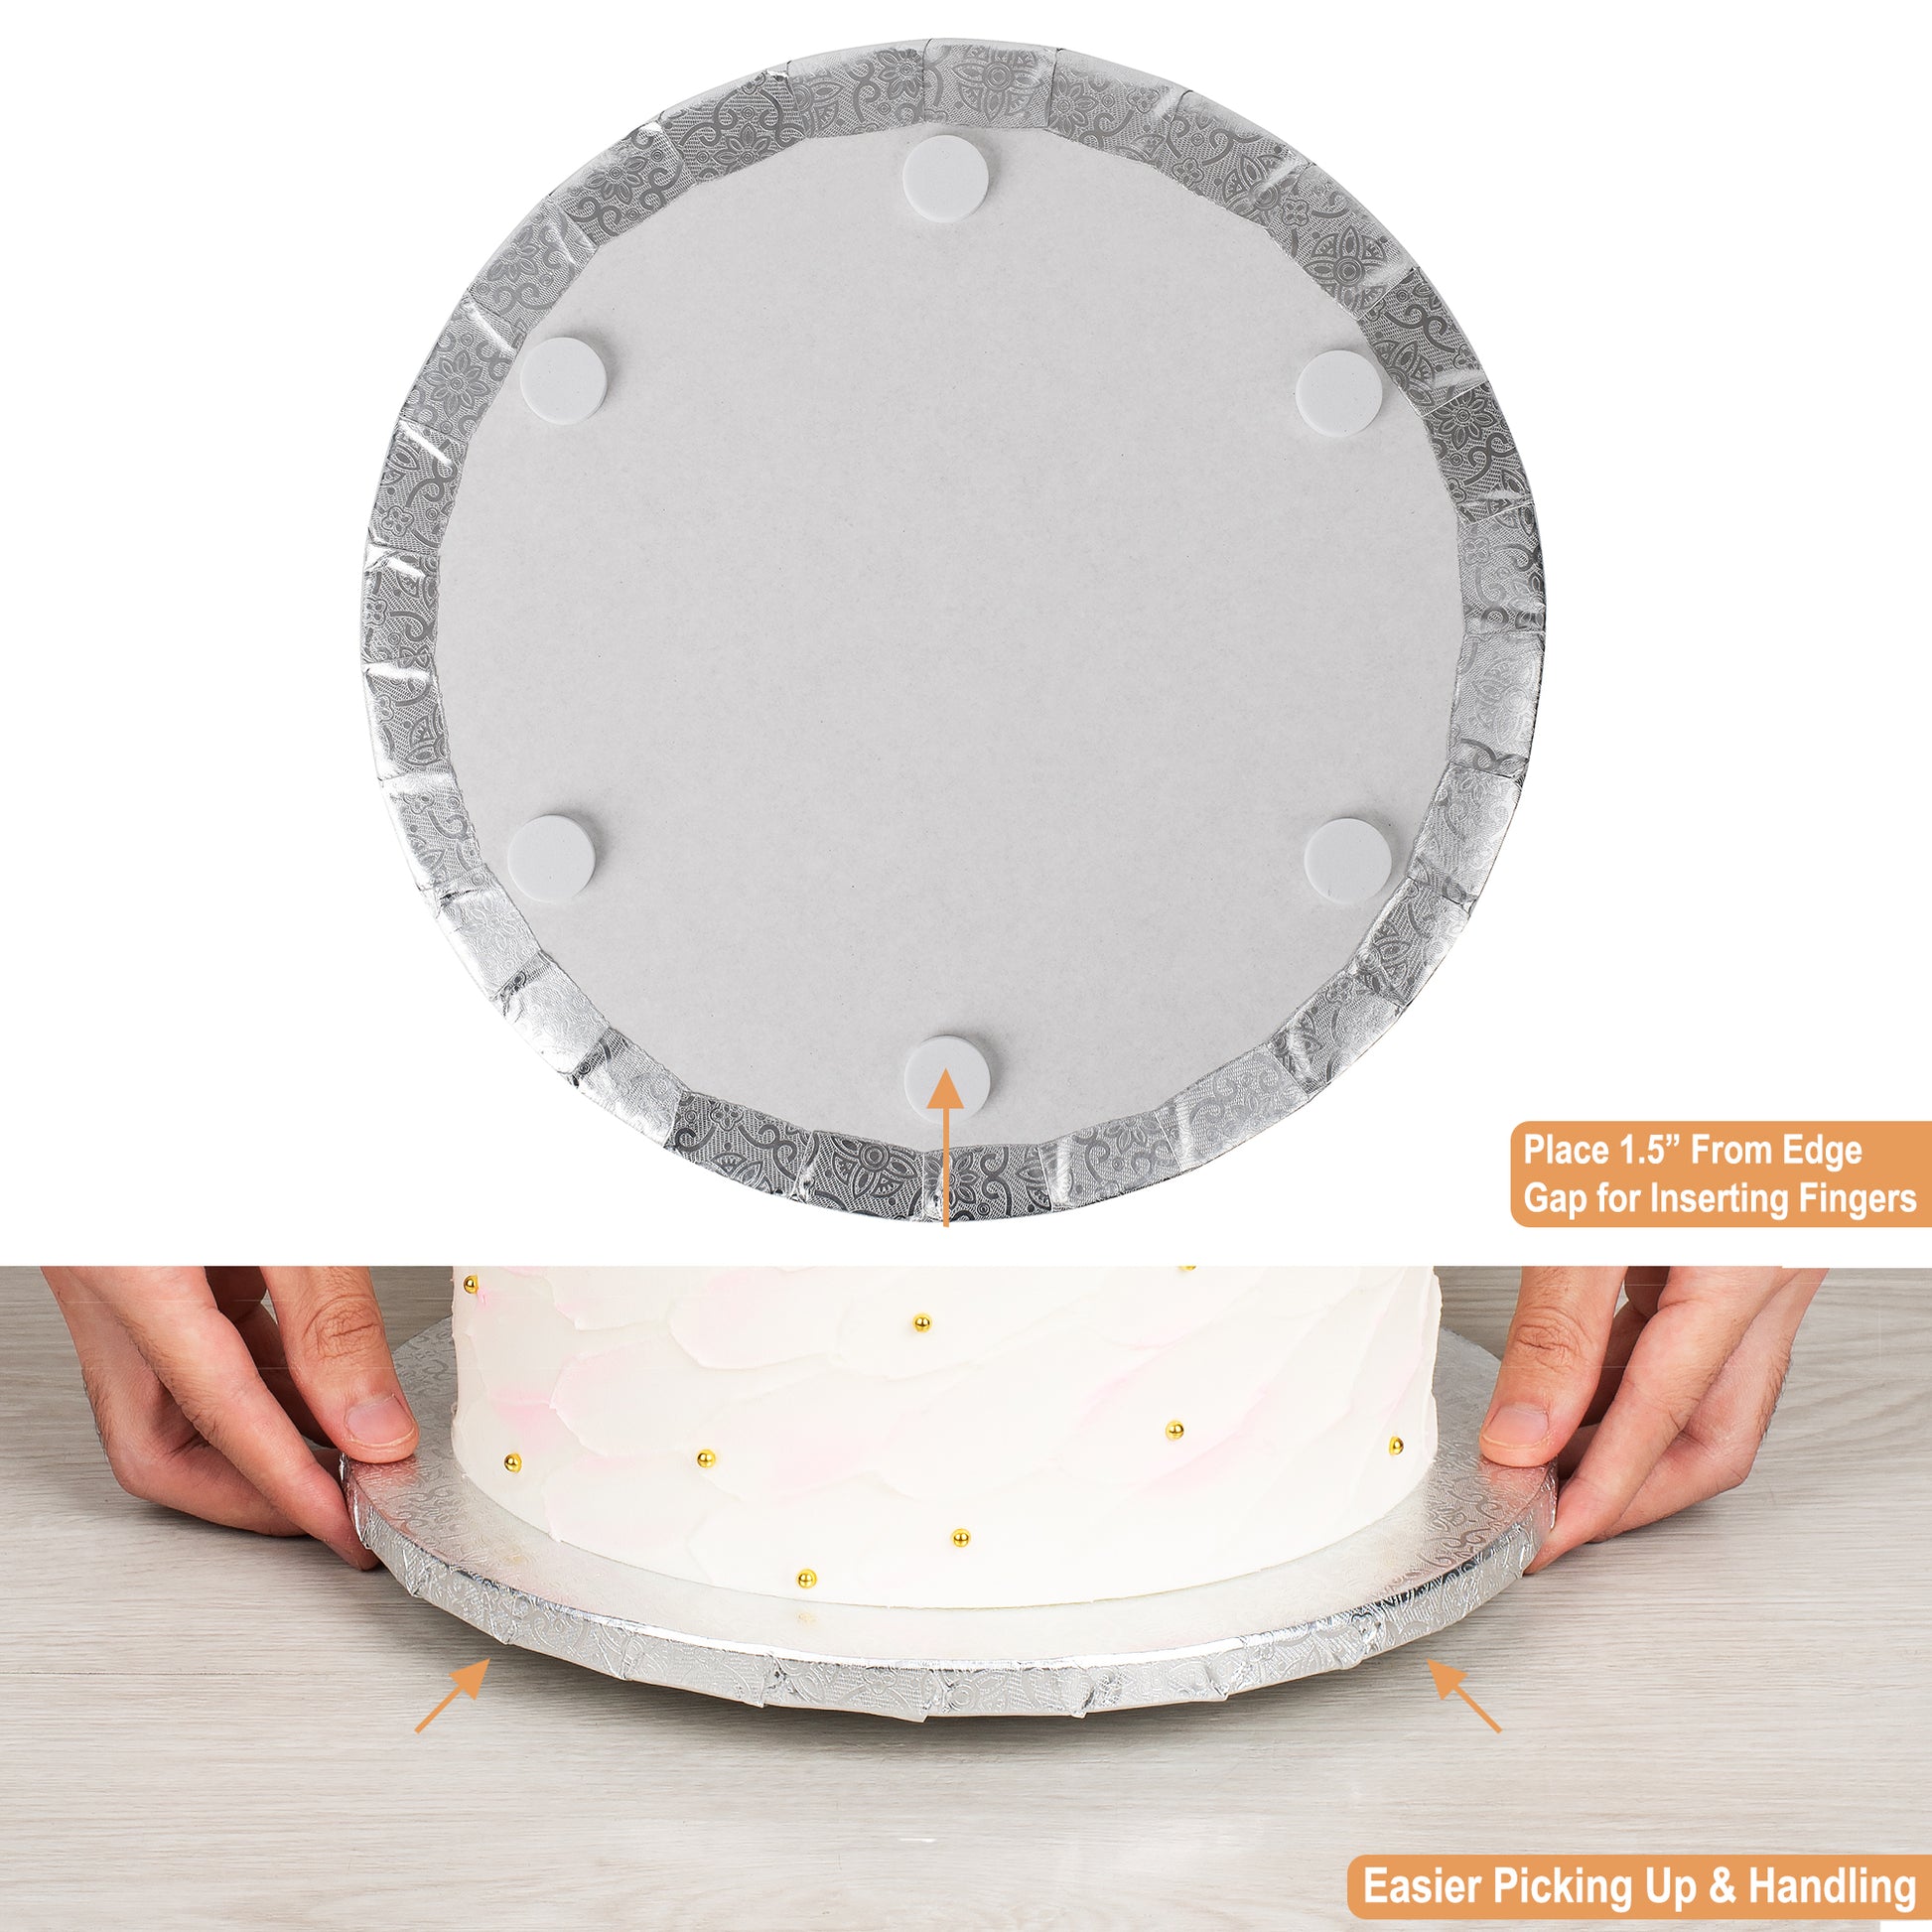 What are Cake Boards & Drums? Uses, Sizes, & Materials